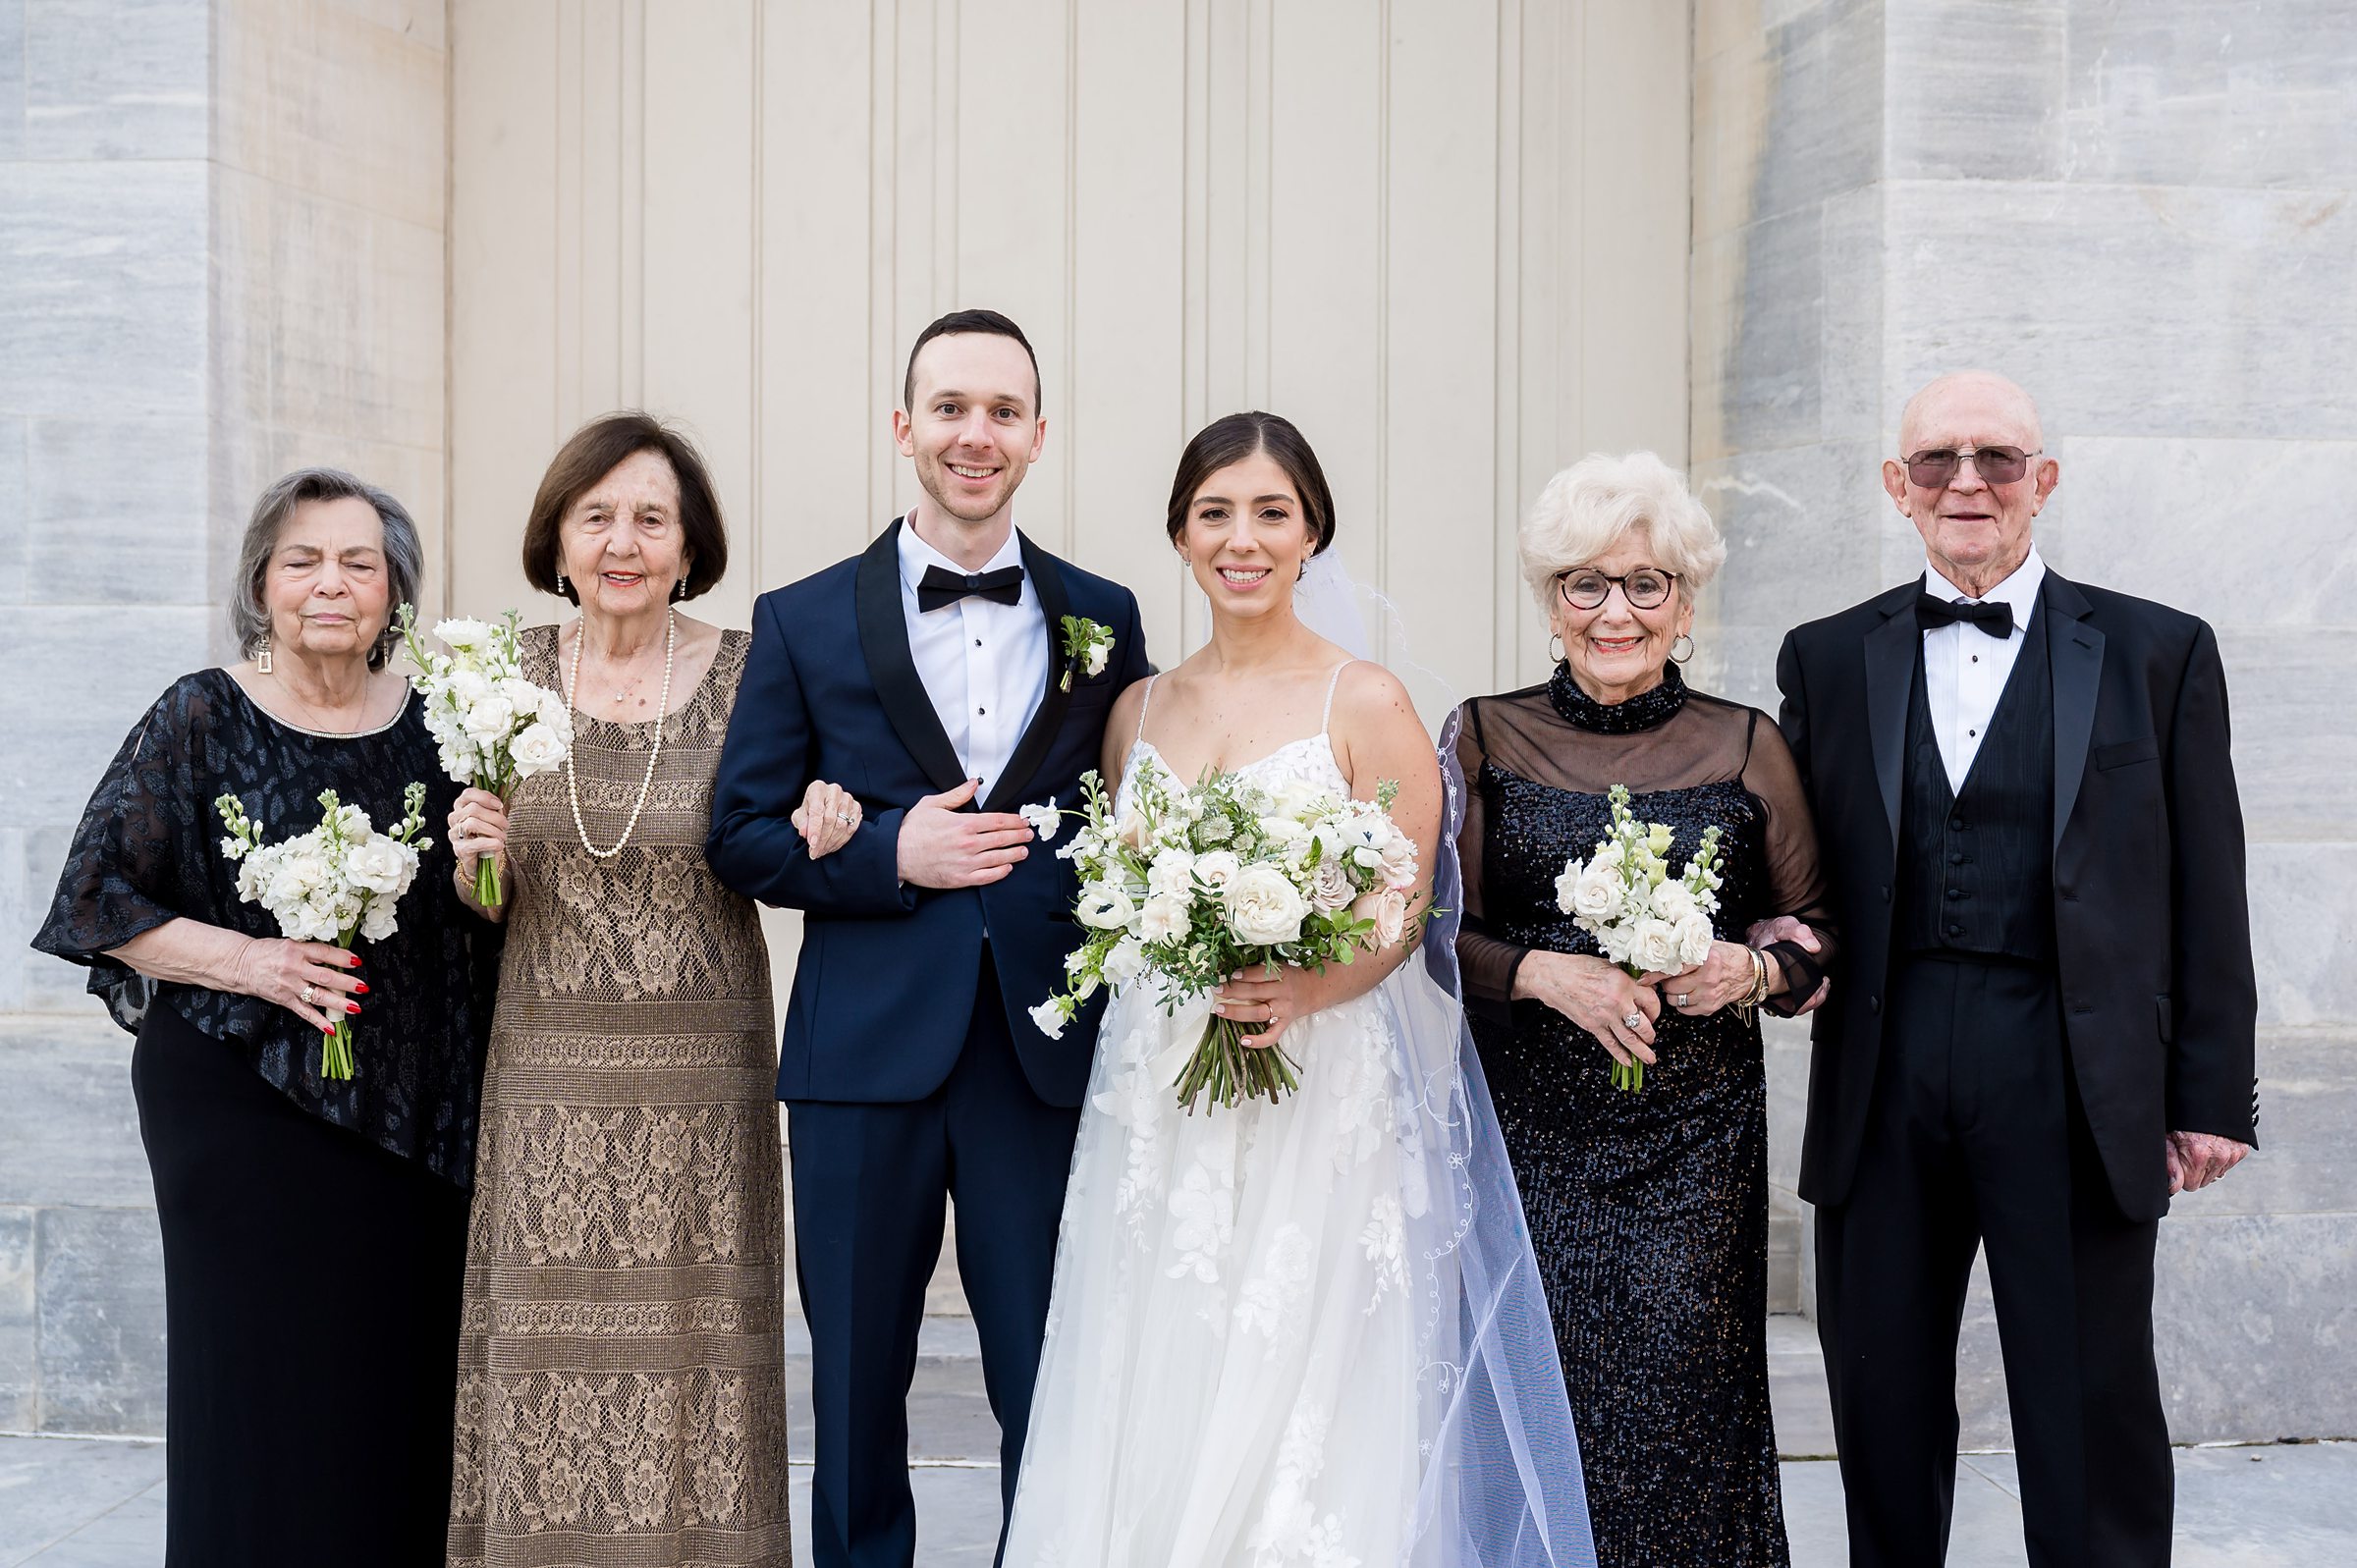 A bride and her family pose for a photo in front of a building during their Lilah Events wedding.